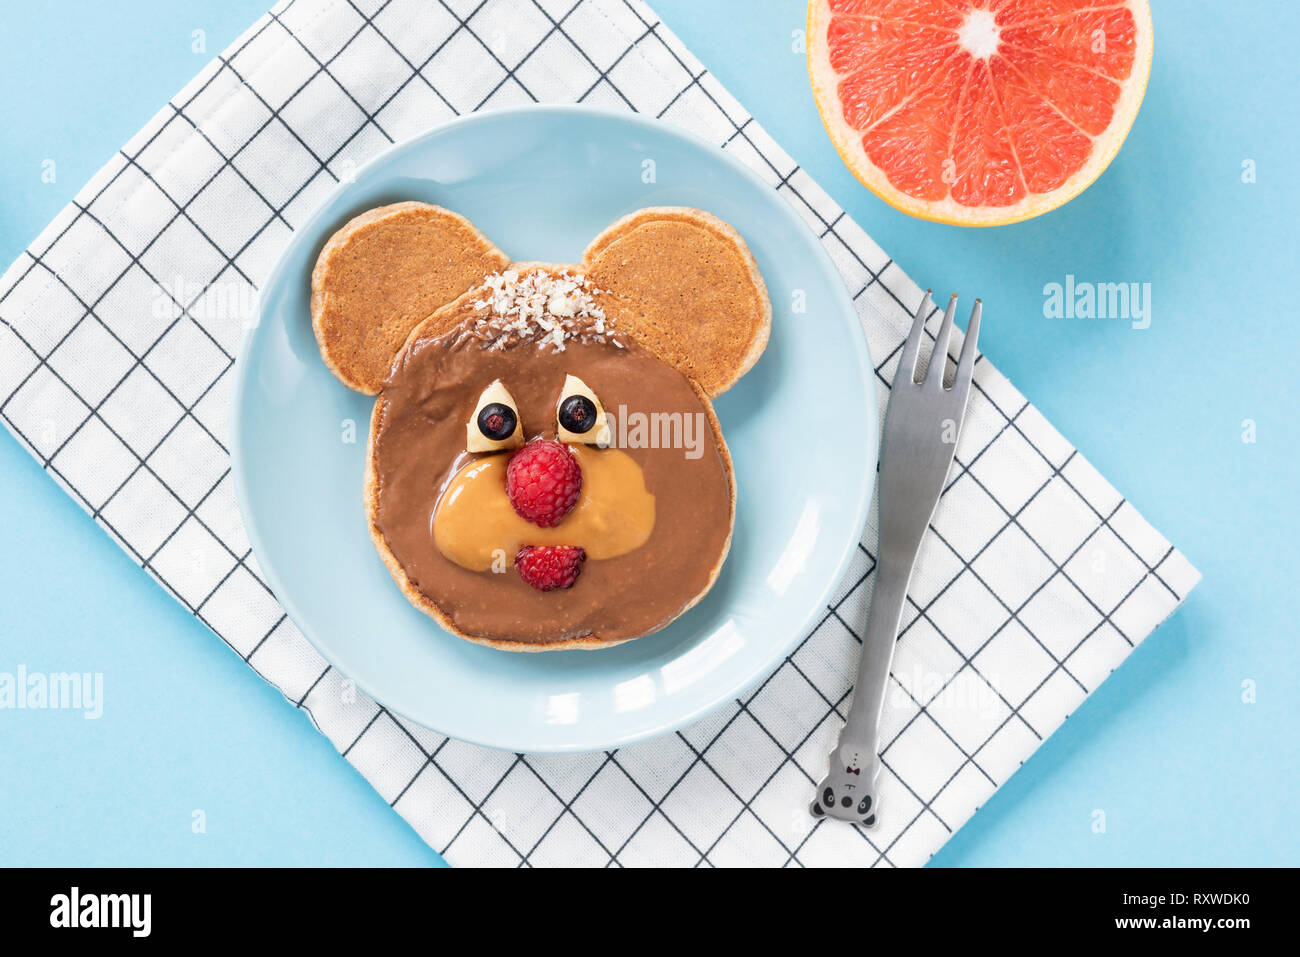 Funny Teddy Bear pancake food art for kids on bright blue background. Top view. Healthy breakfast children meal Stock Photo